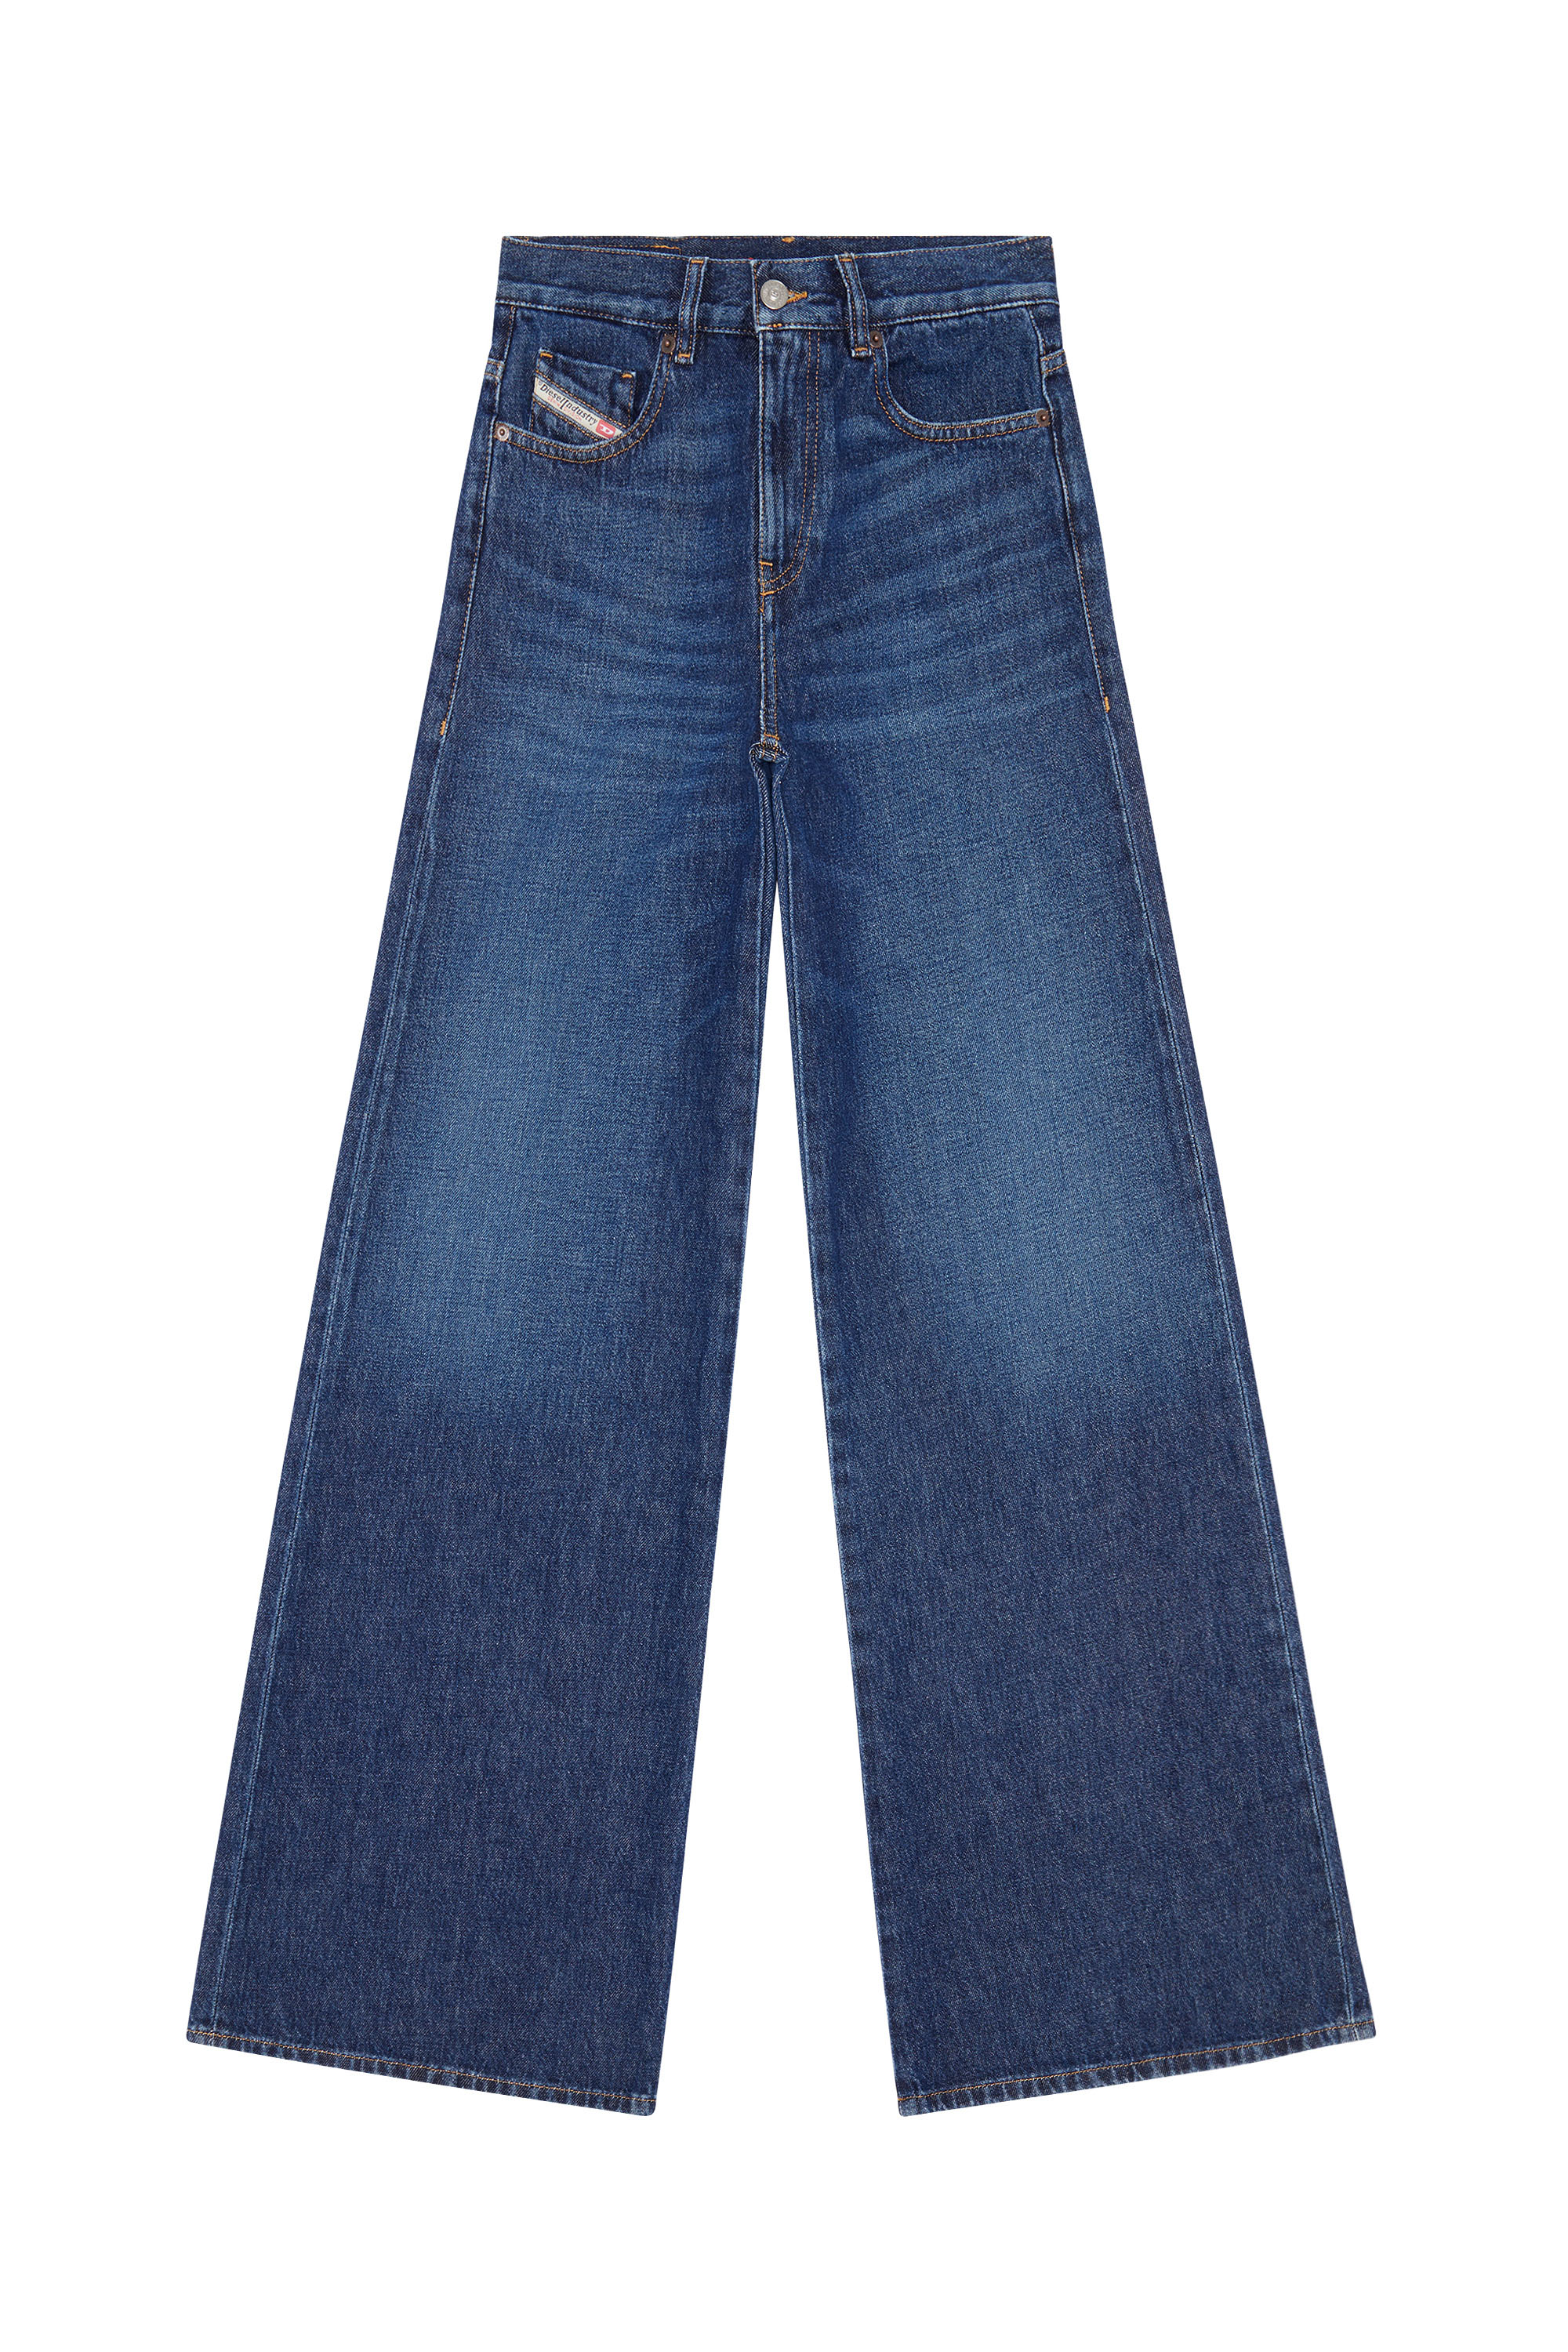 Bootcut and Flare Jeans 1978 D-Akemi 09C03, Dark Blue - Jeans